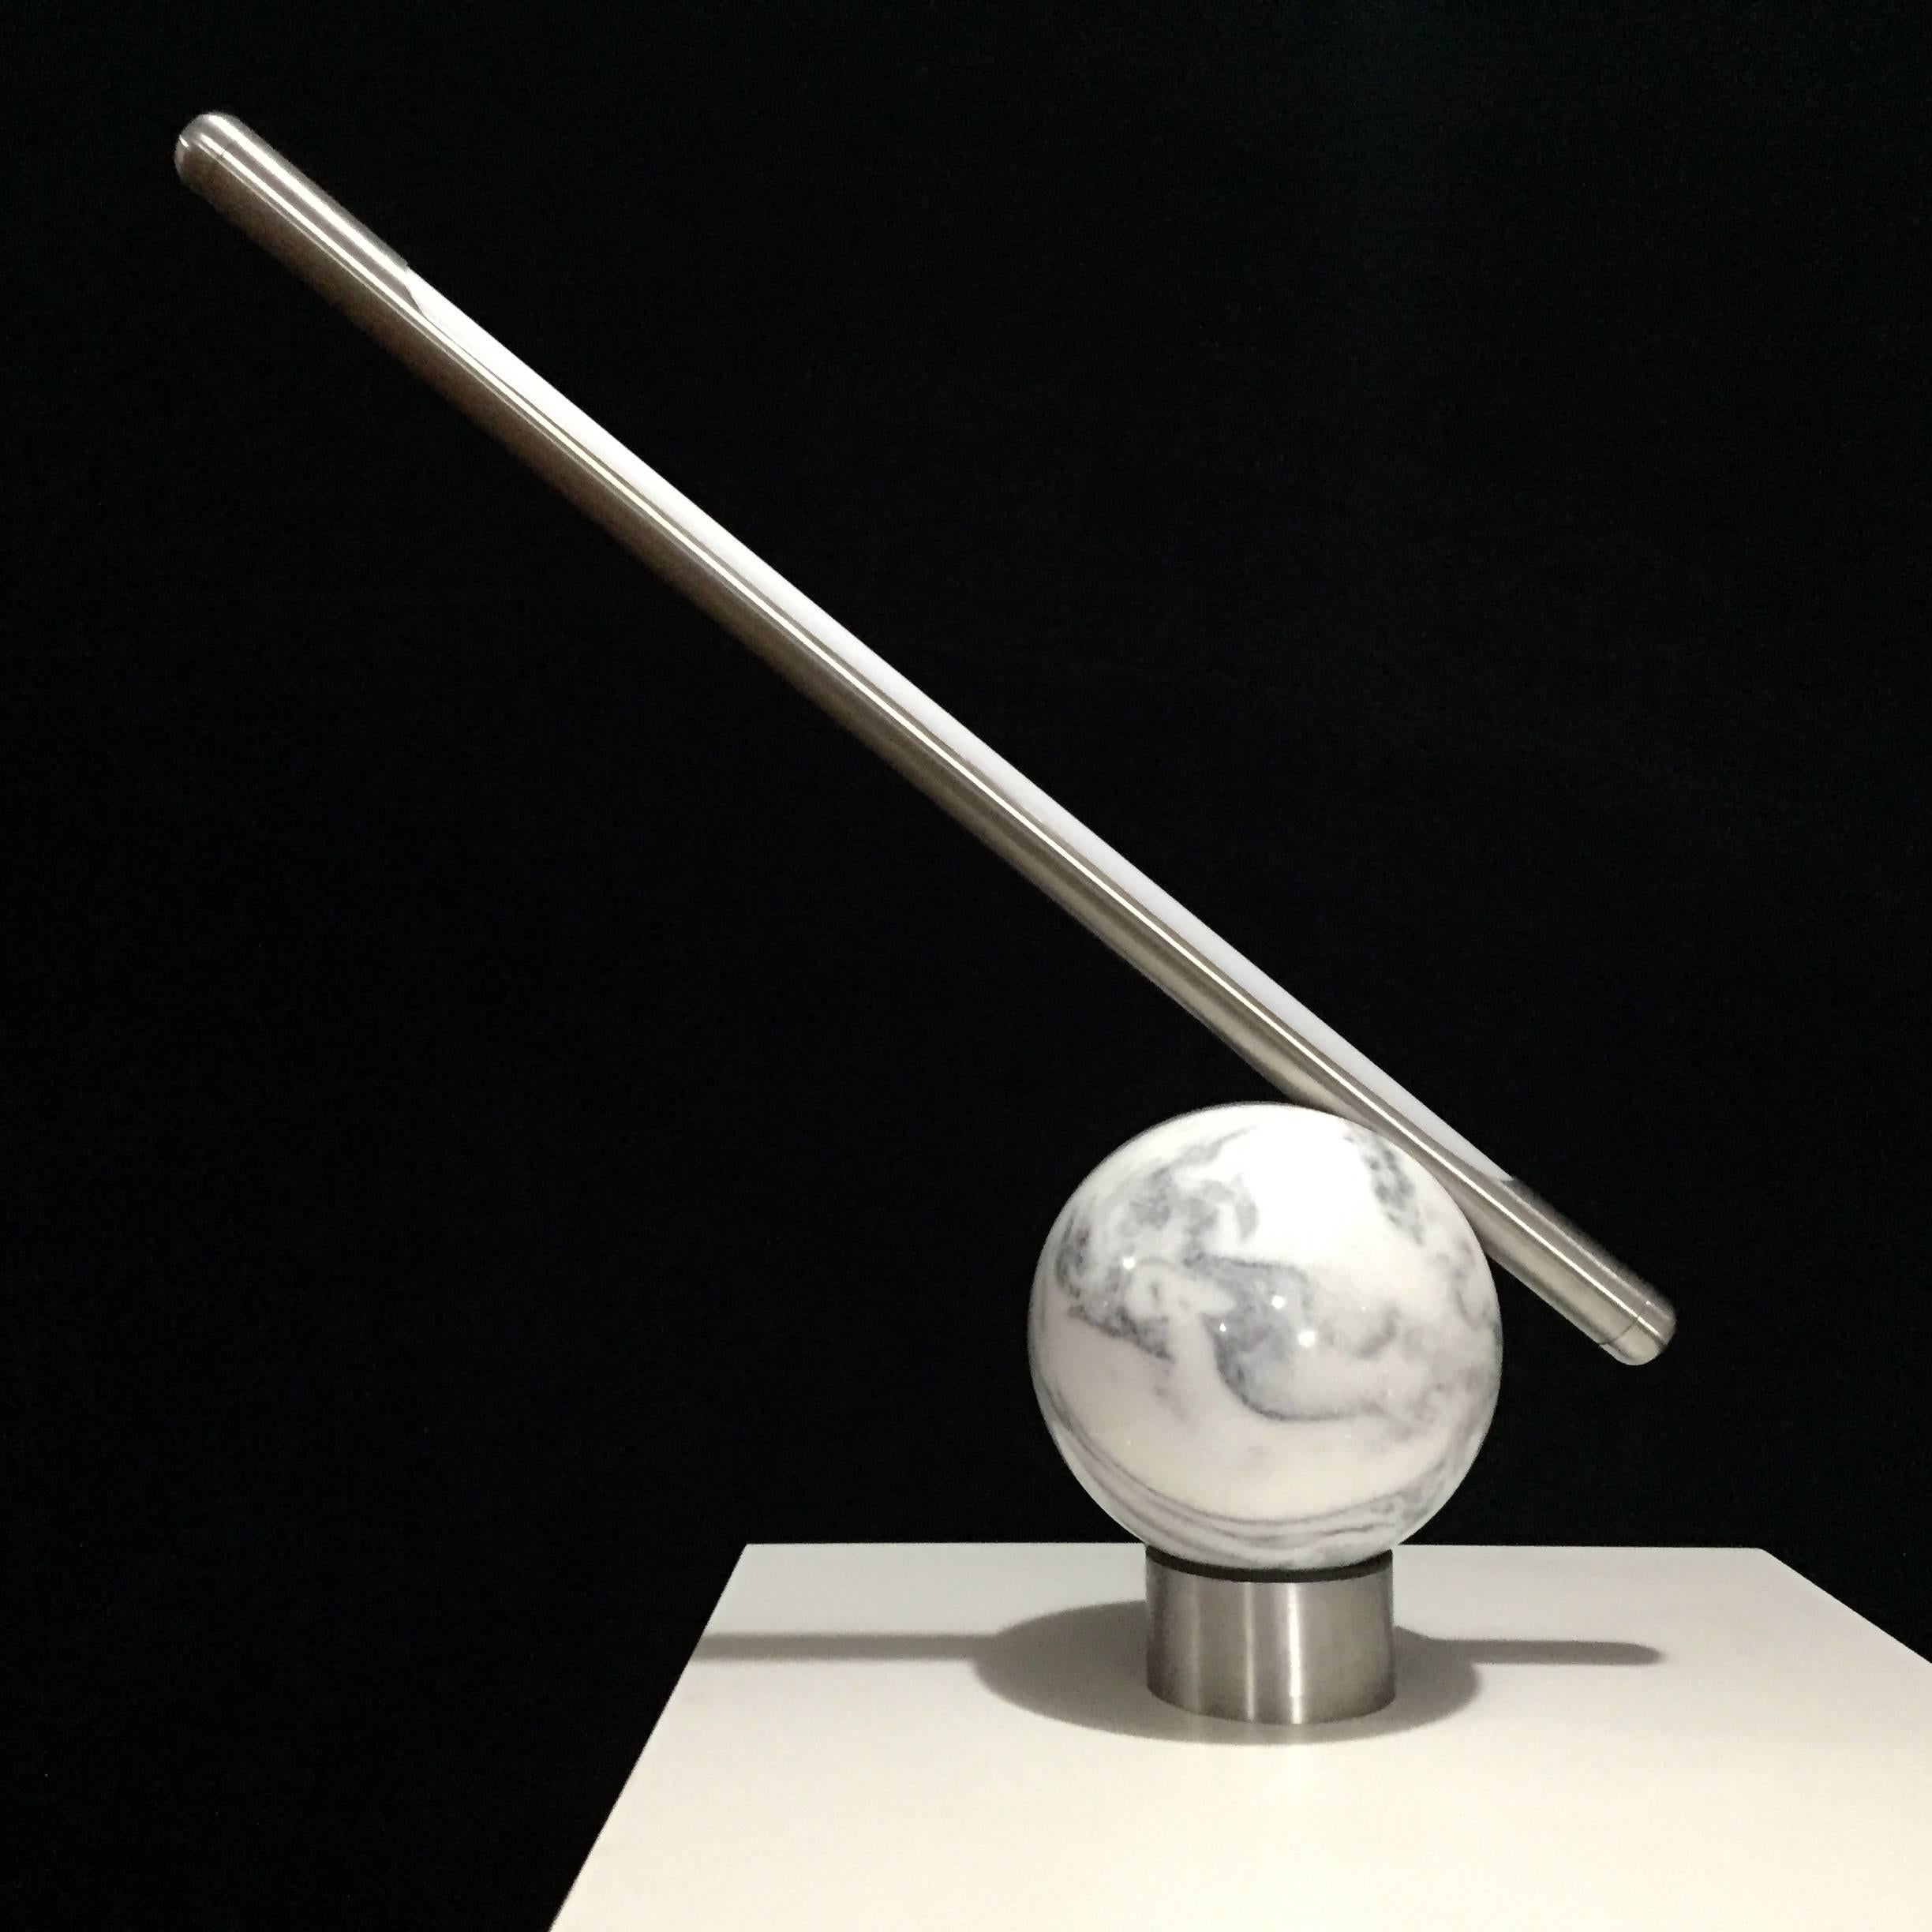 Minimalist 'Bubble' Table Lamp in Stainless Steel, Brazilian Contemporary Style